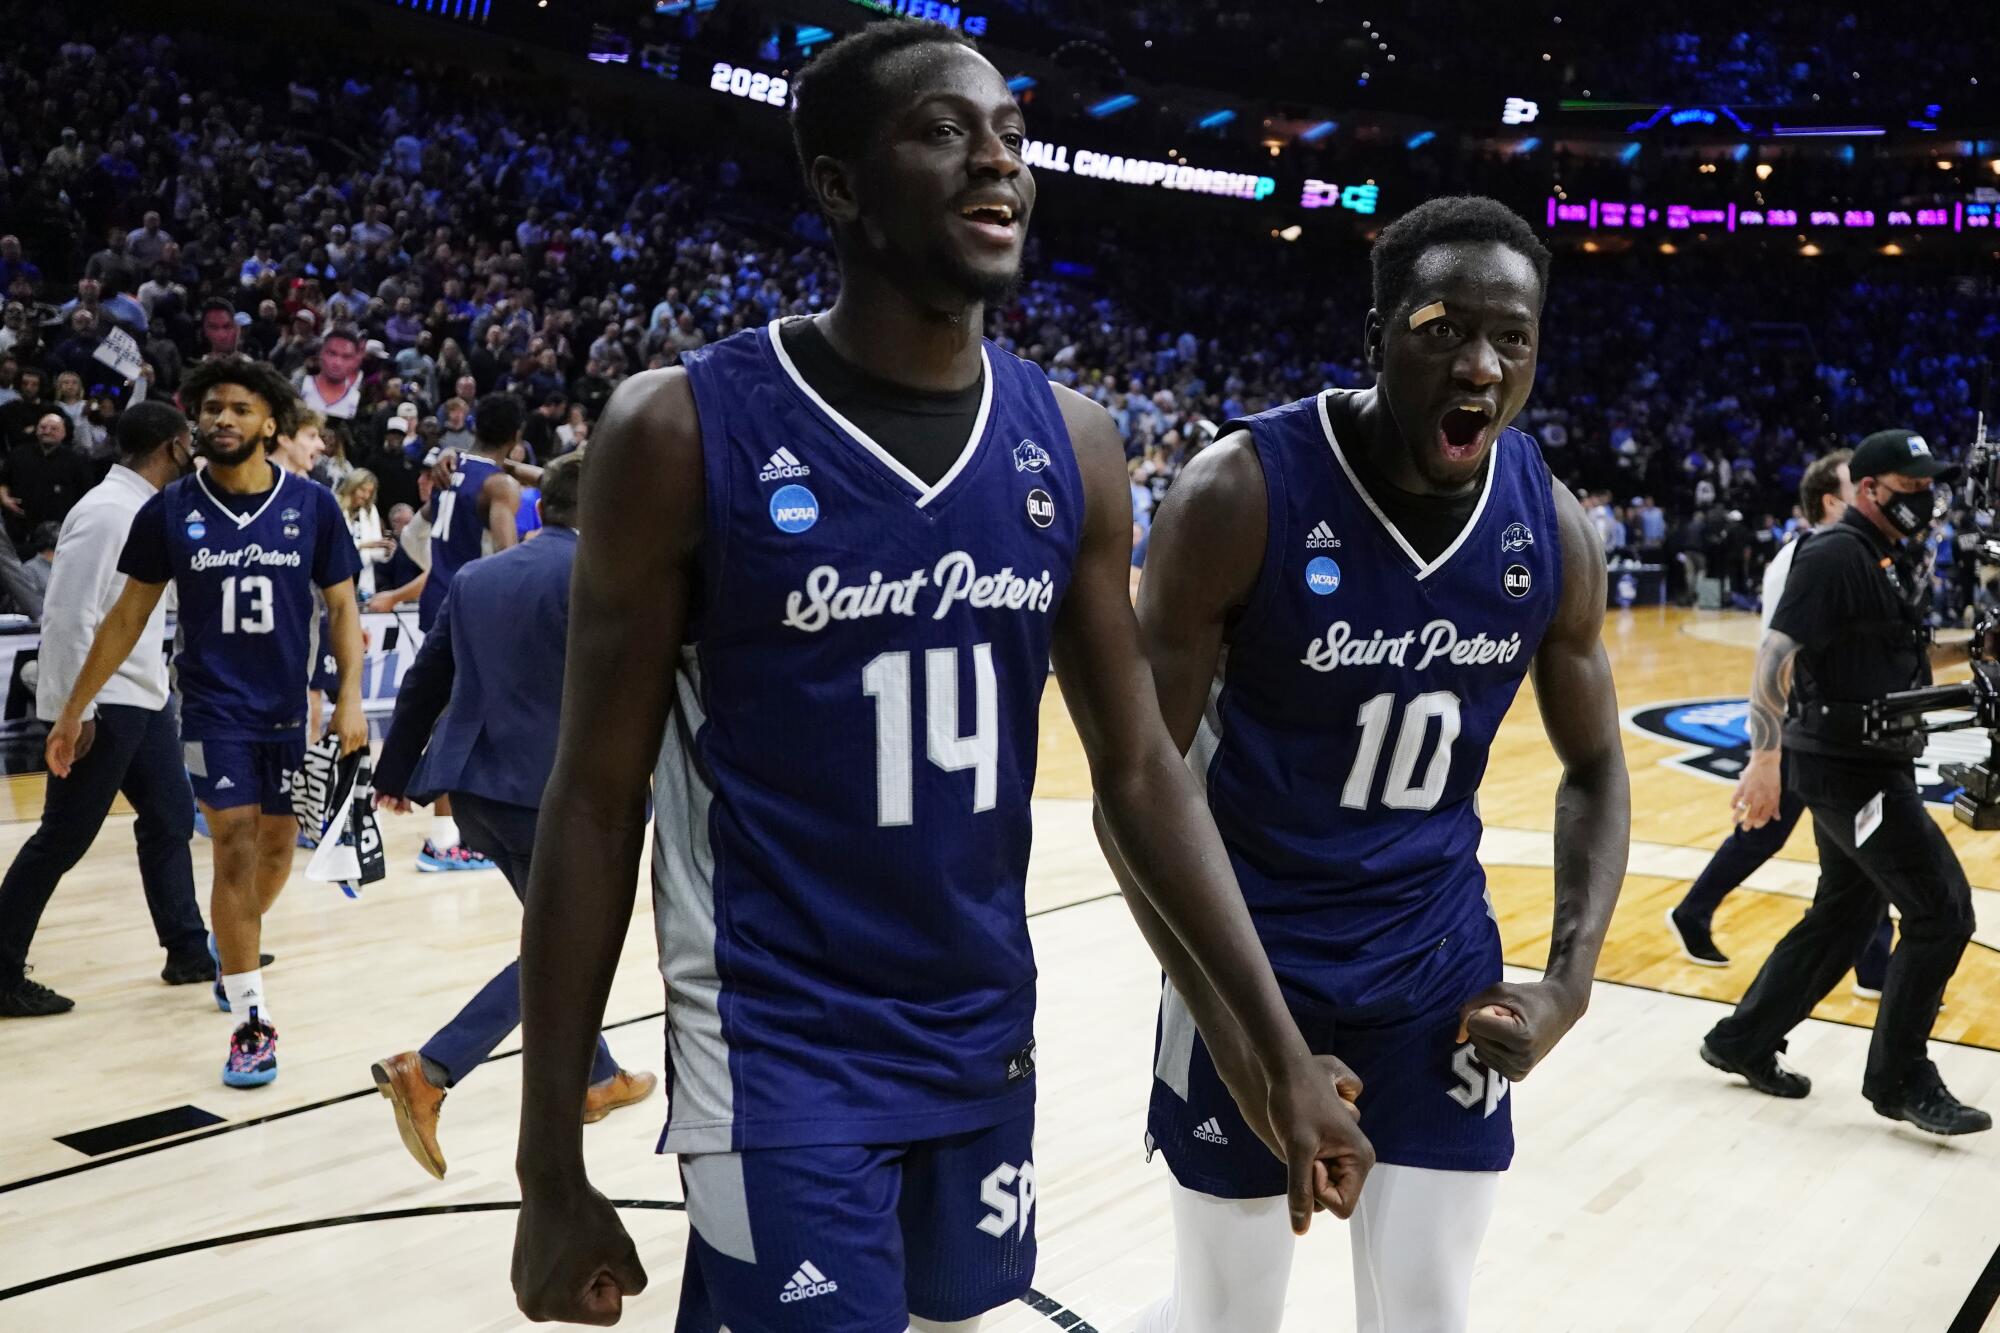 Saint Peter's Fousseyni Drame and Hassan Drame celebrate after defeating Purdue.